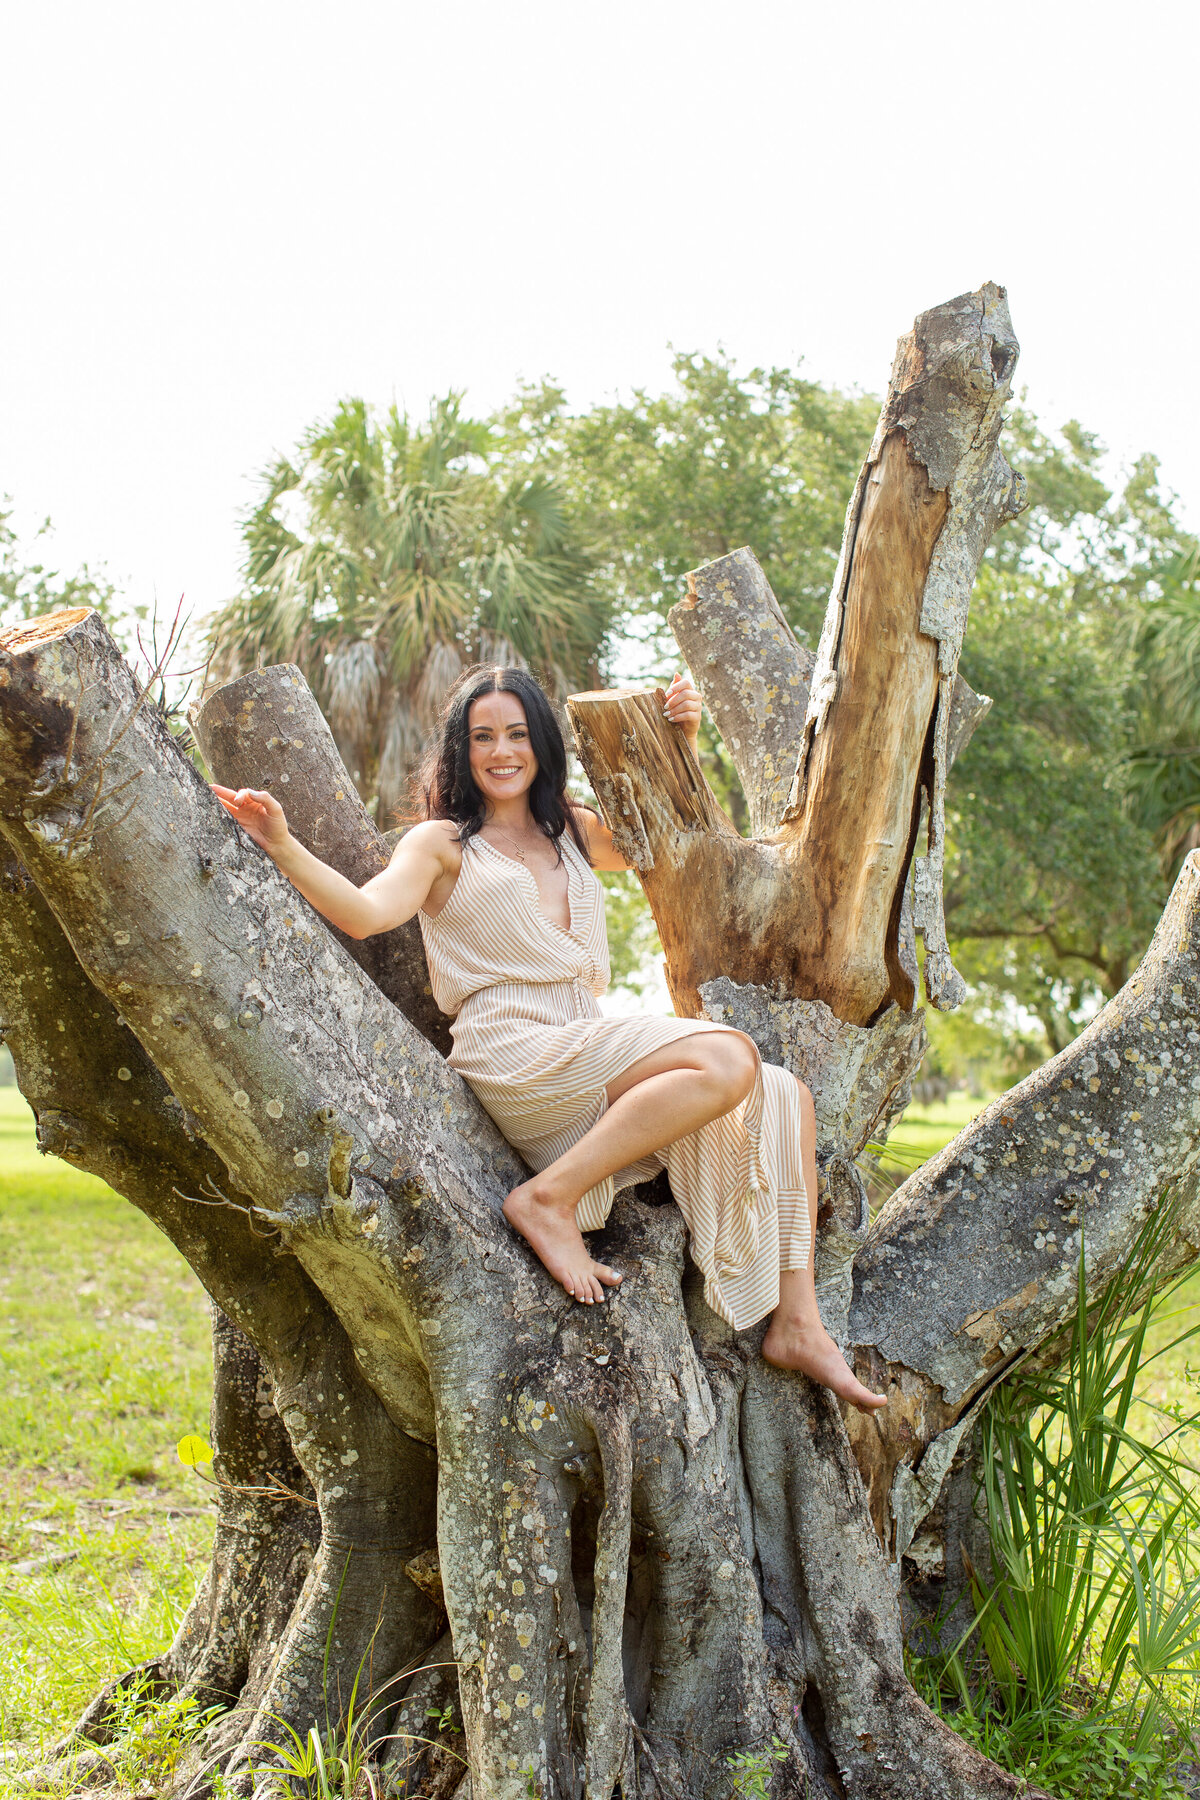 Meaghan-Health-Coach-Brand-Photography-St-Pete-19